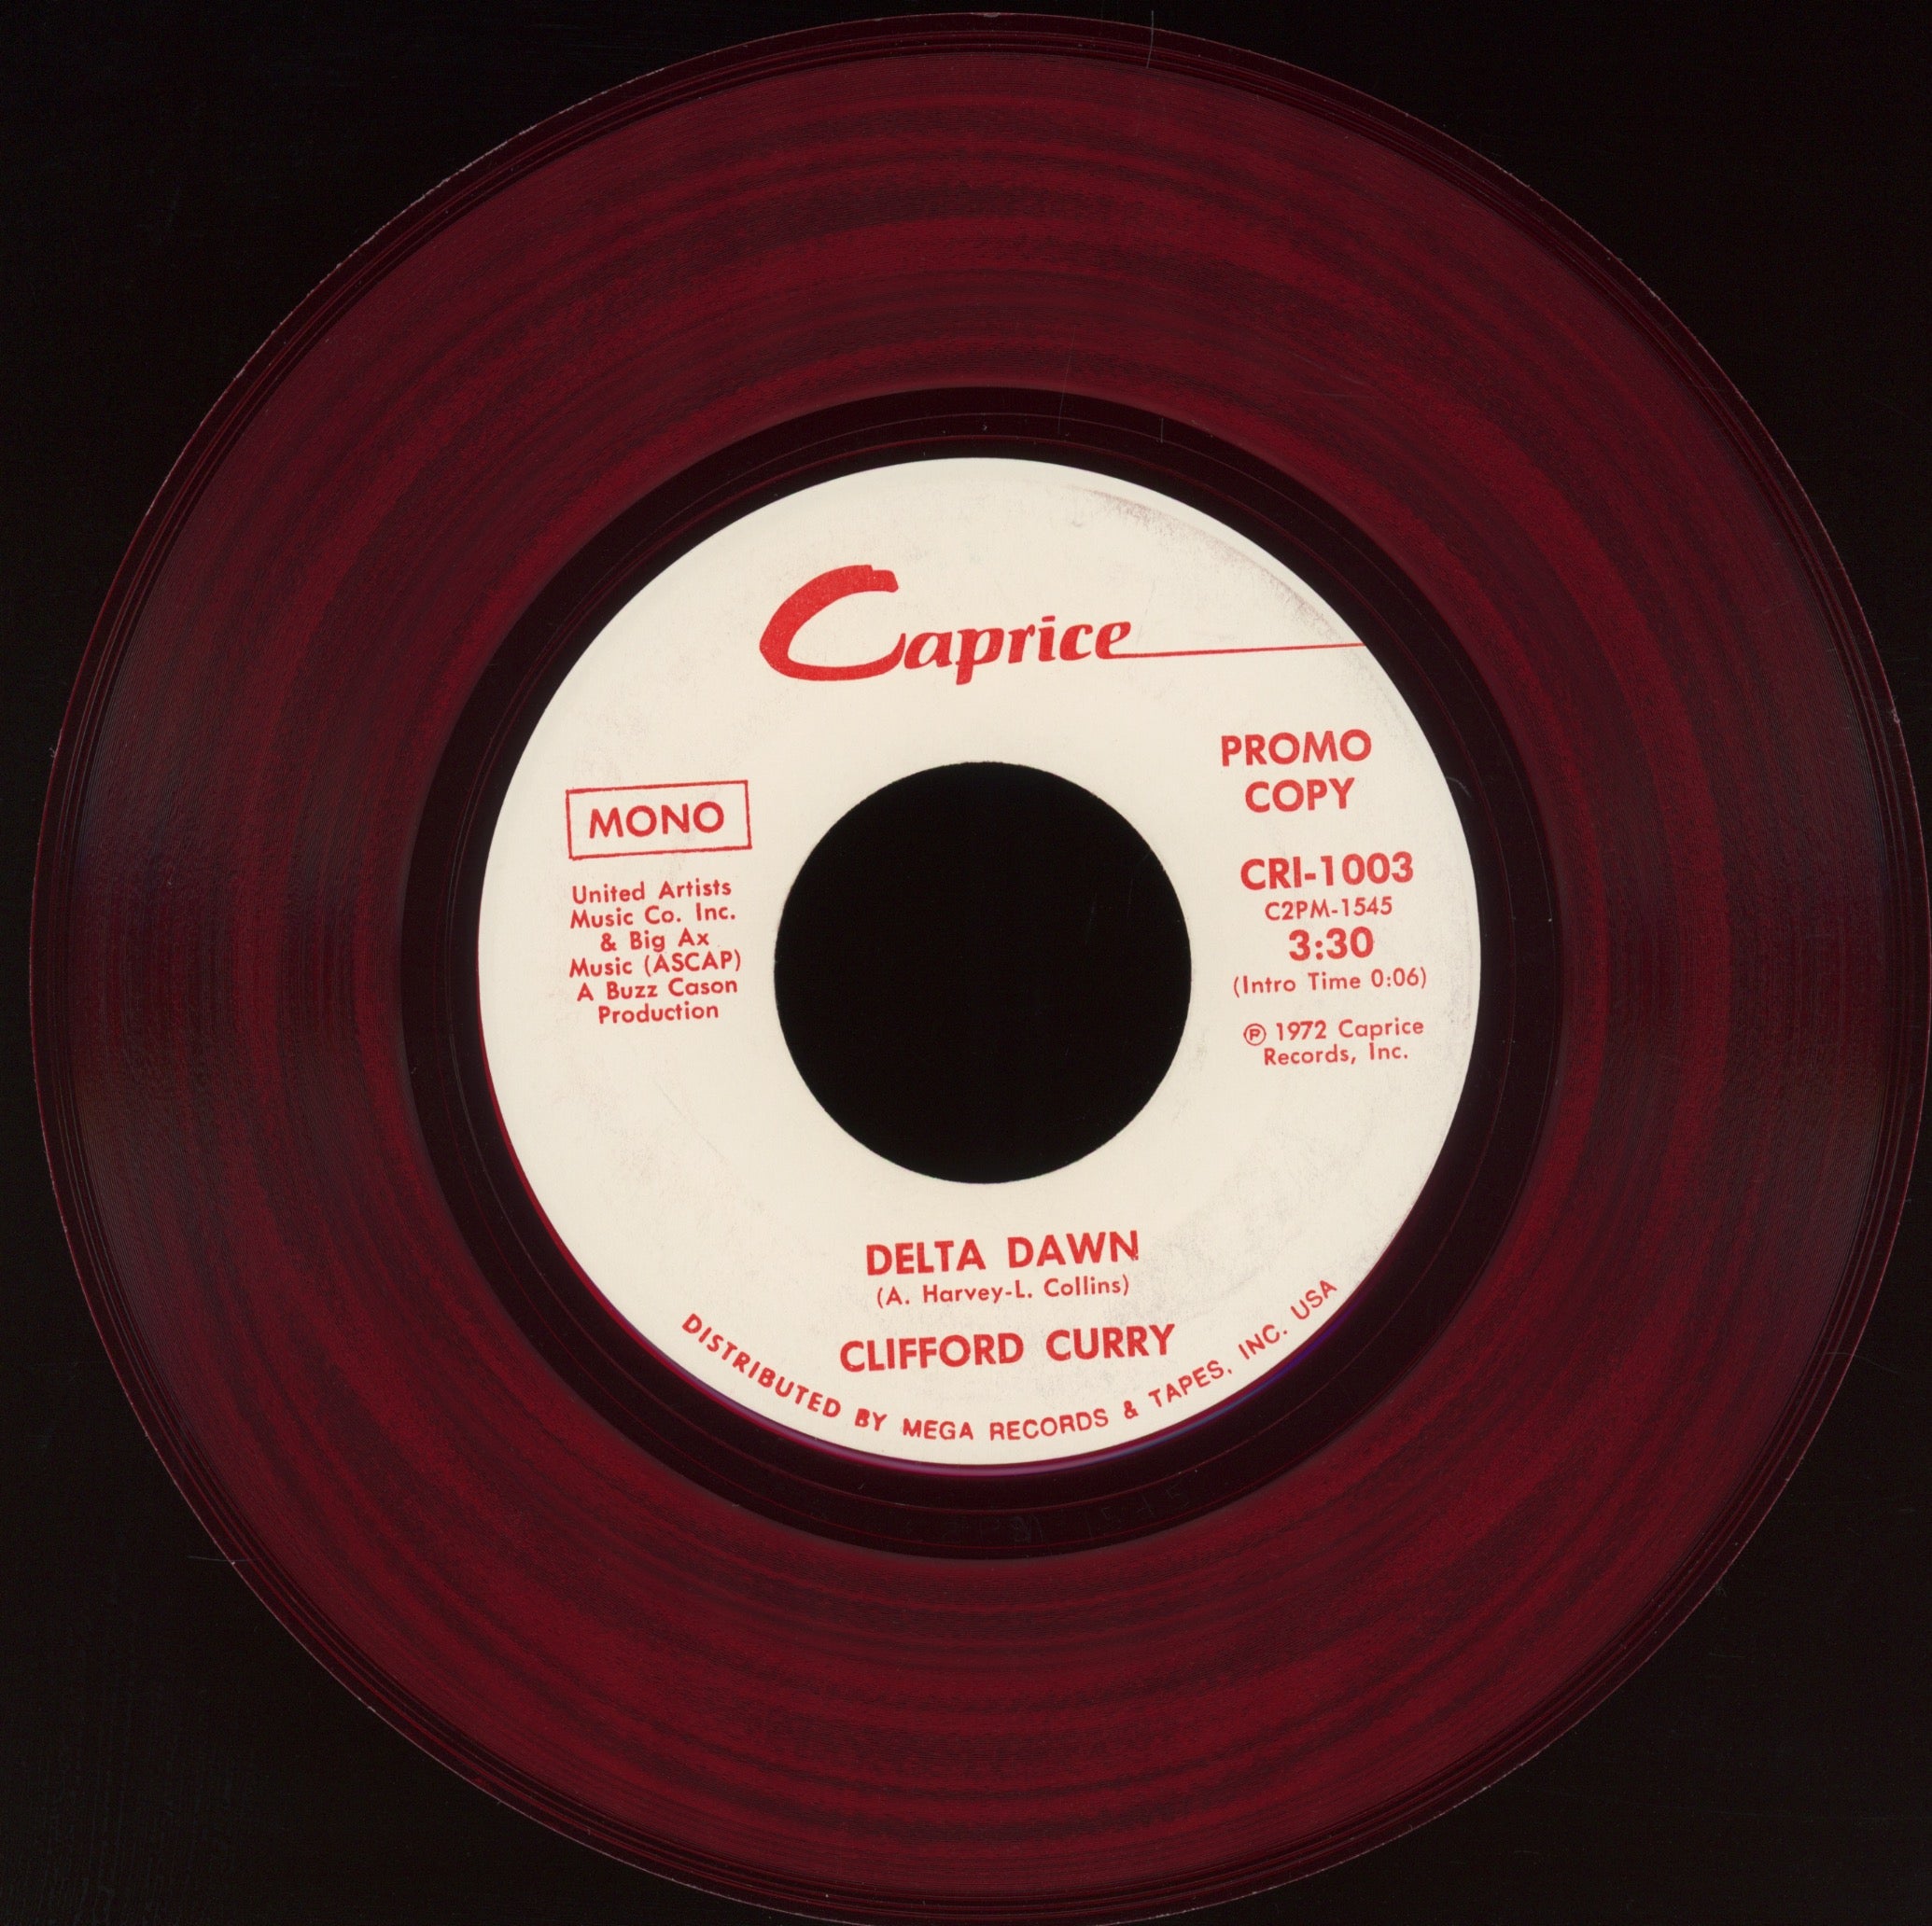 Clifford Curry - Delta Dawn on Caprice Red Vinyl Promo Funk 45 Breaks